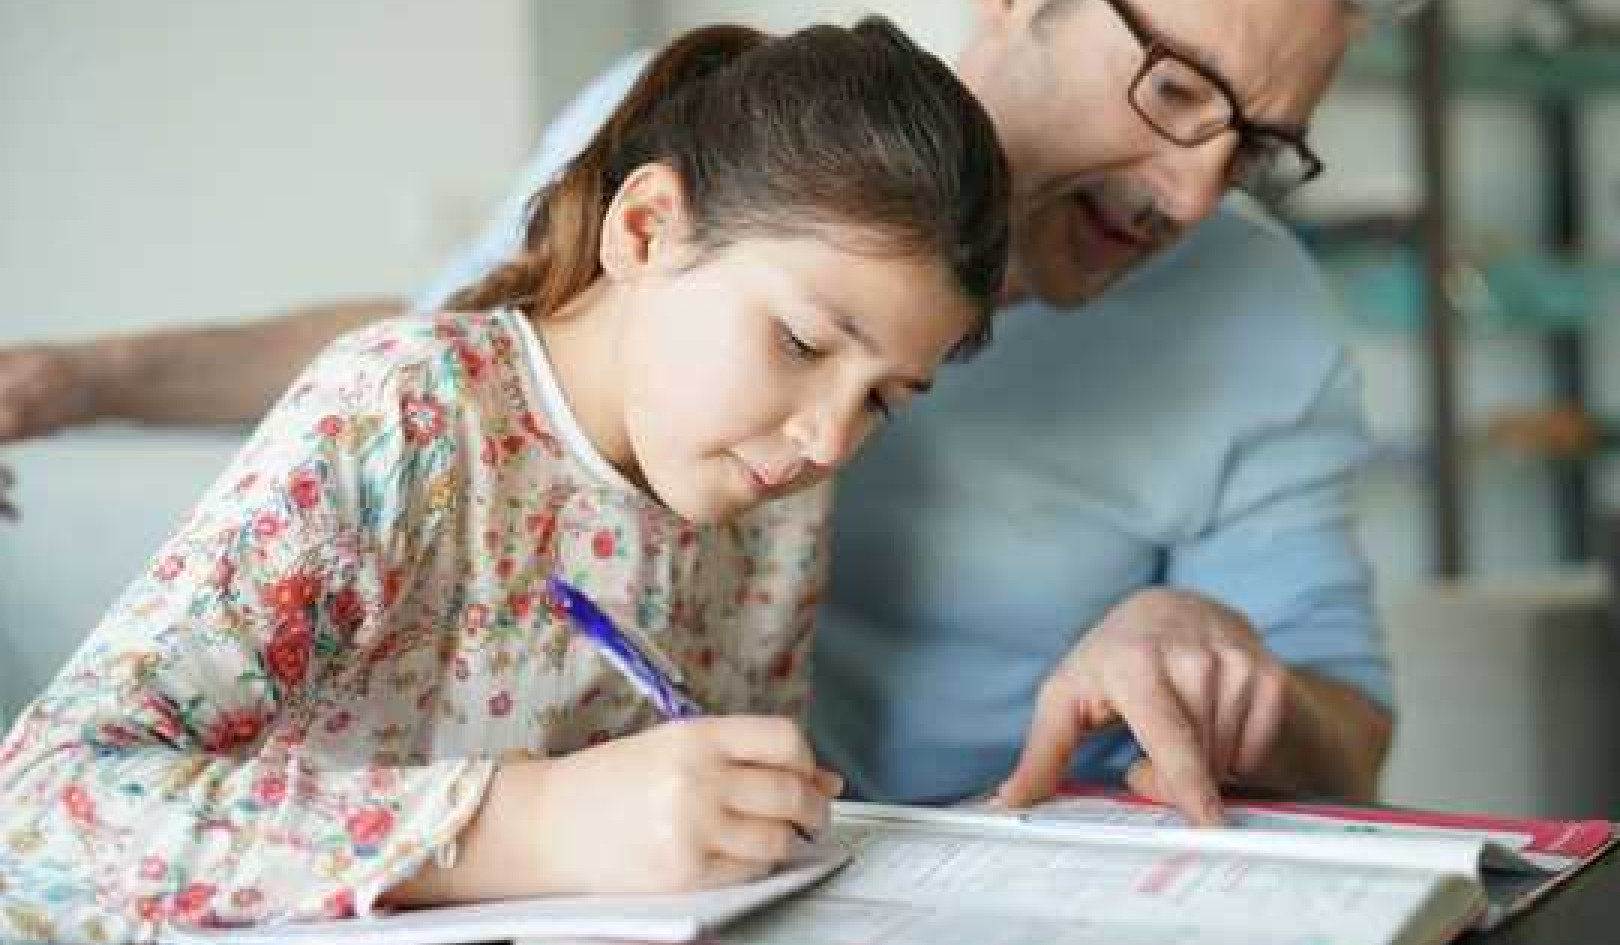 Should Parents Help Their Kids With Homework?